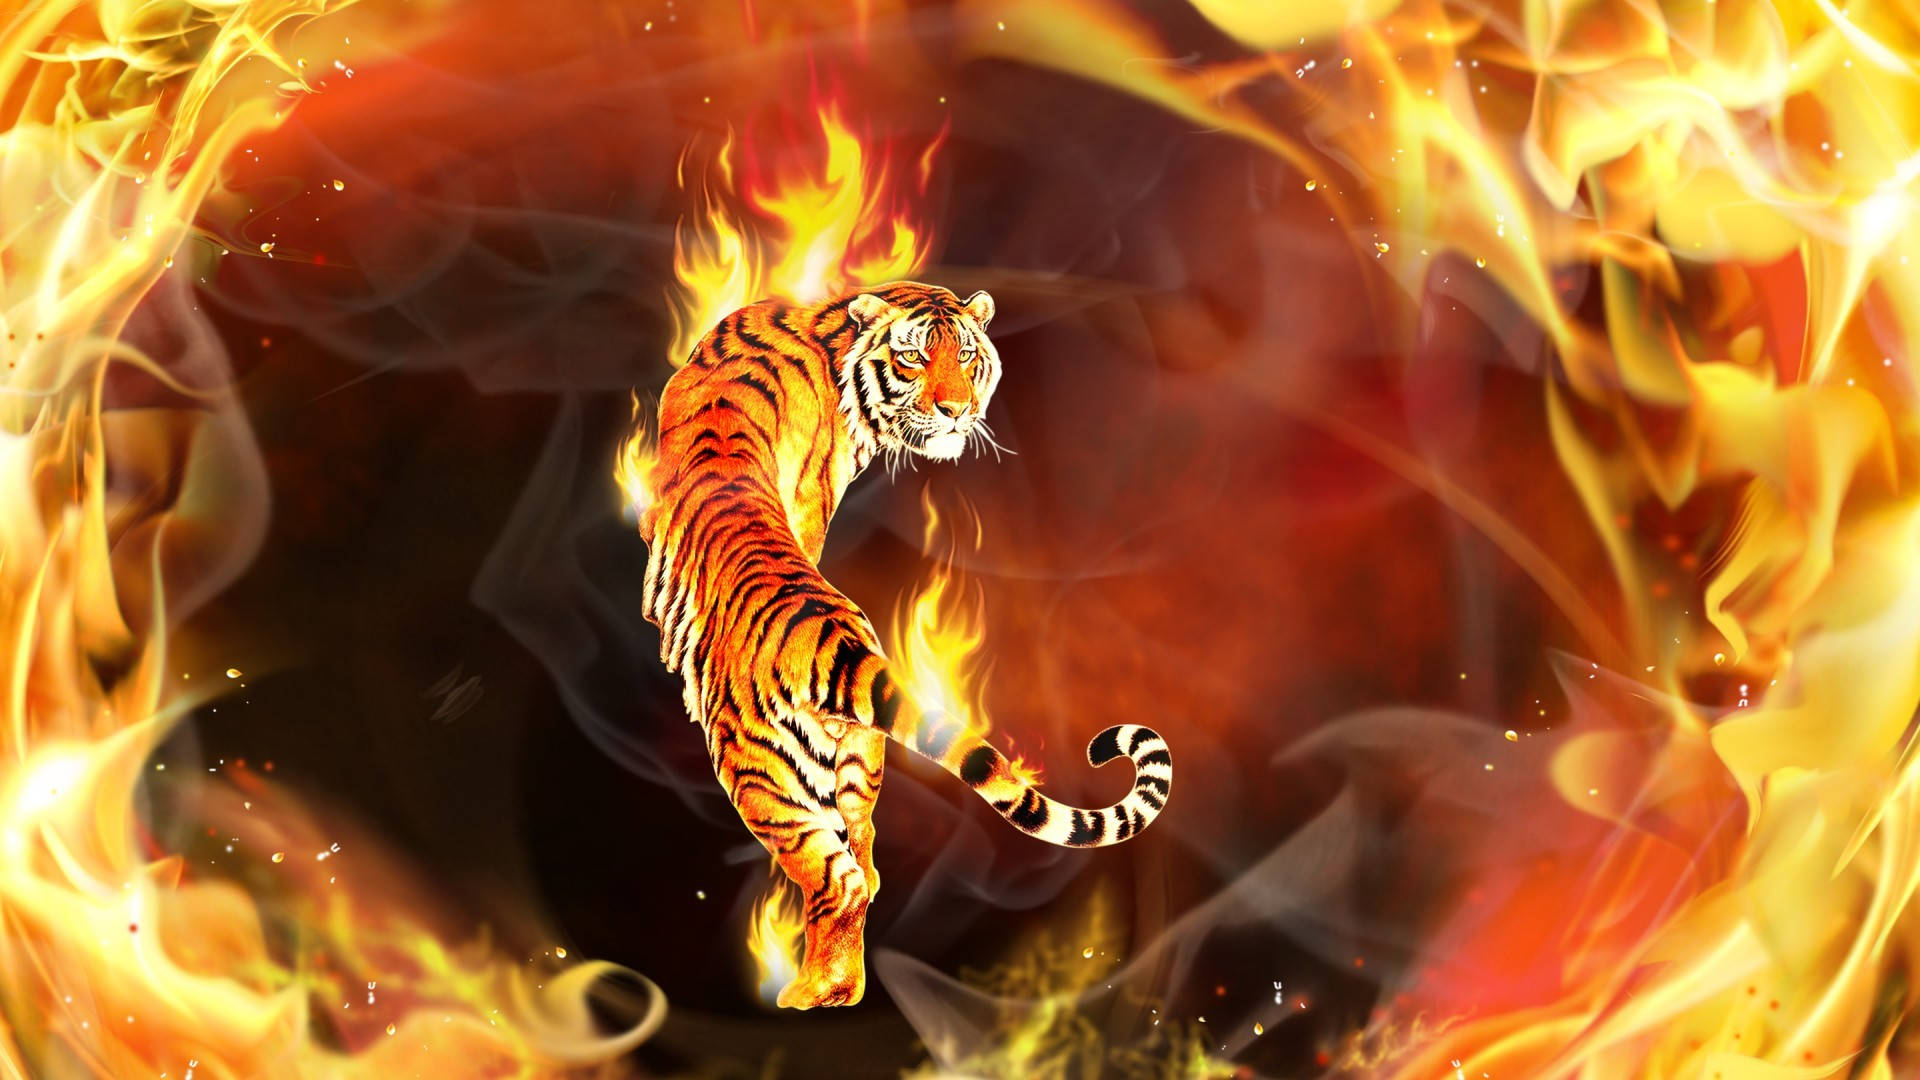 On Fire Tiger